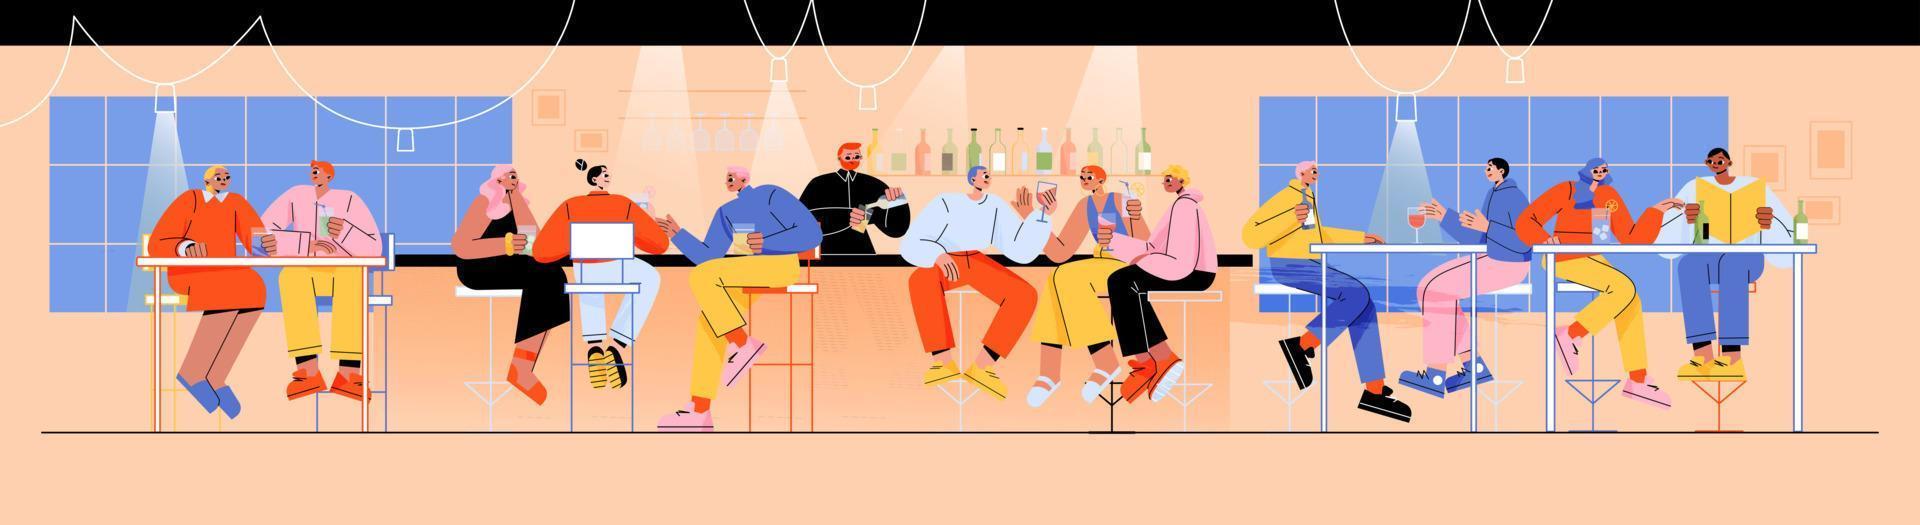 People drinking alcohol in bar sit on high chairs vector